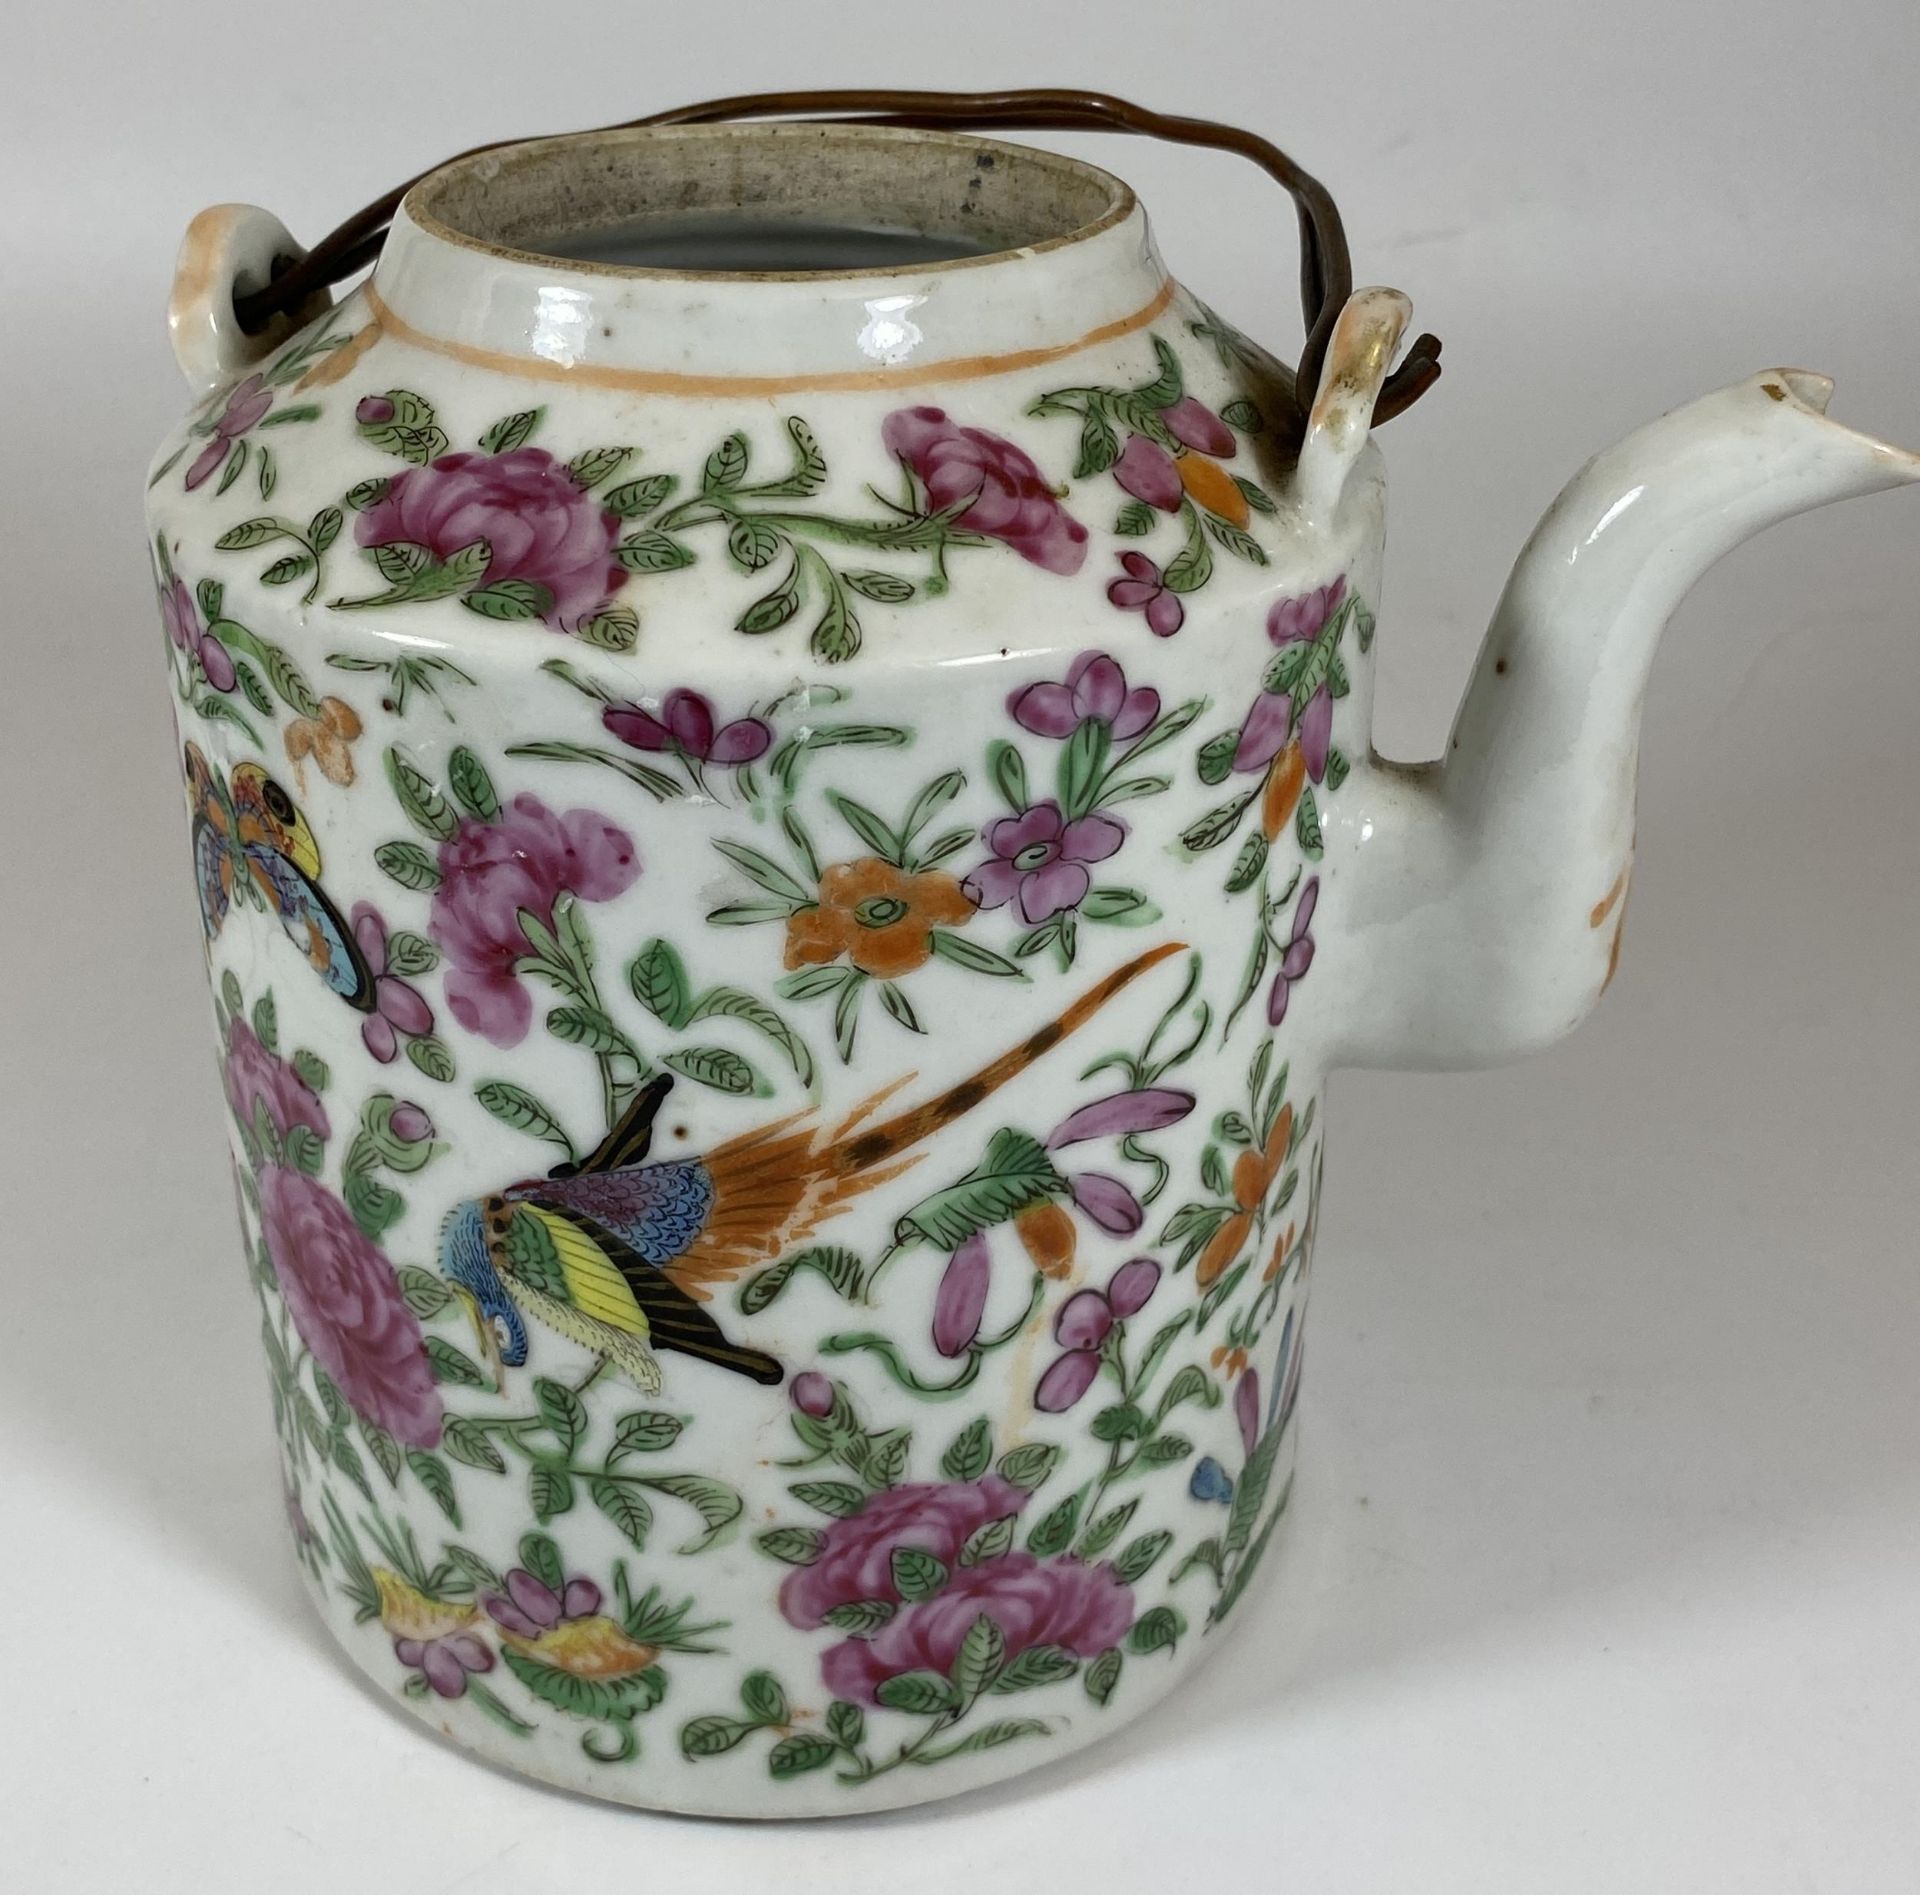 A 19TH CENTURY CHINESE CANTON FAMILLE ROSE BIRD AND FLORAL DESIGN TEAPOT, HEIGHT 16CM